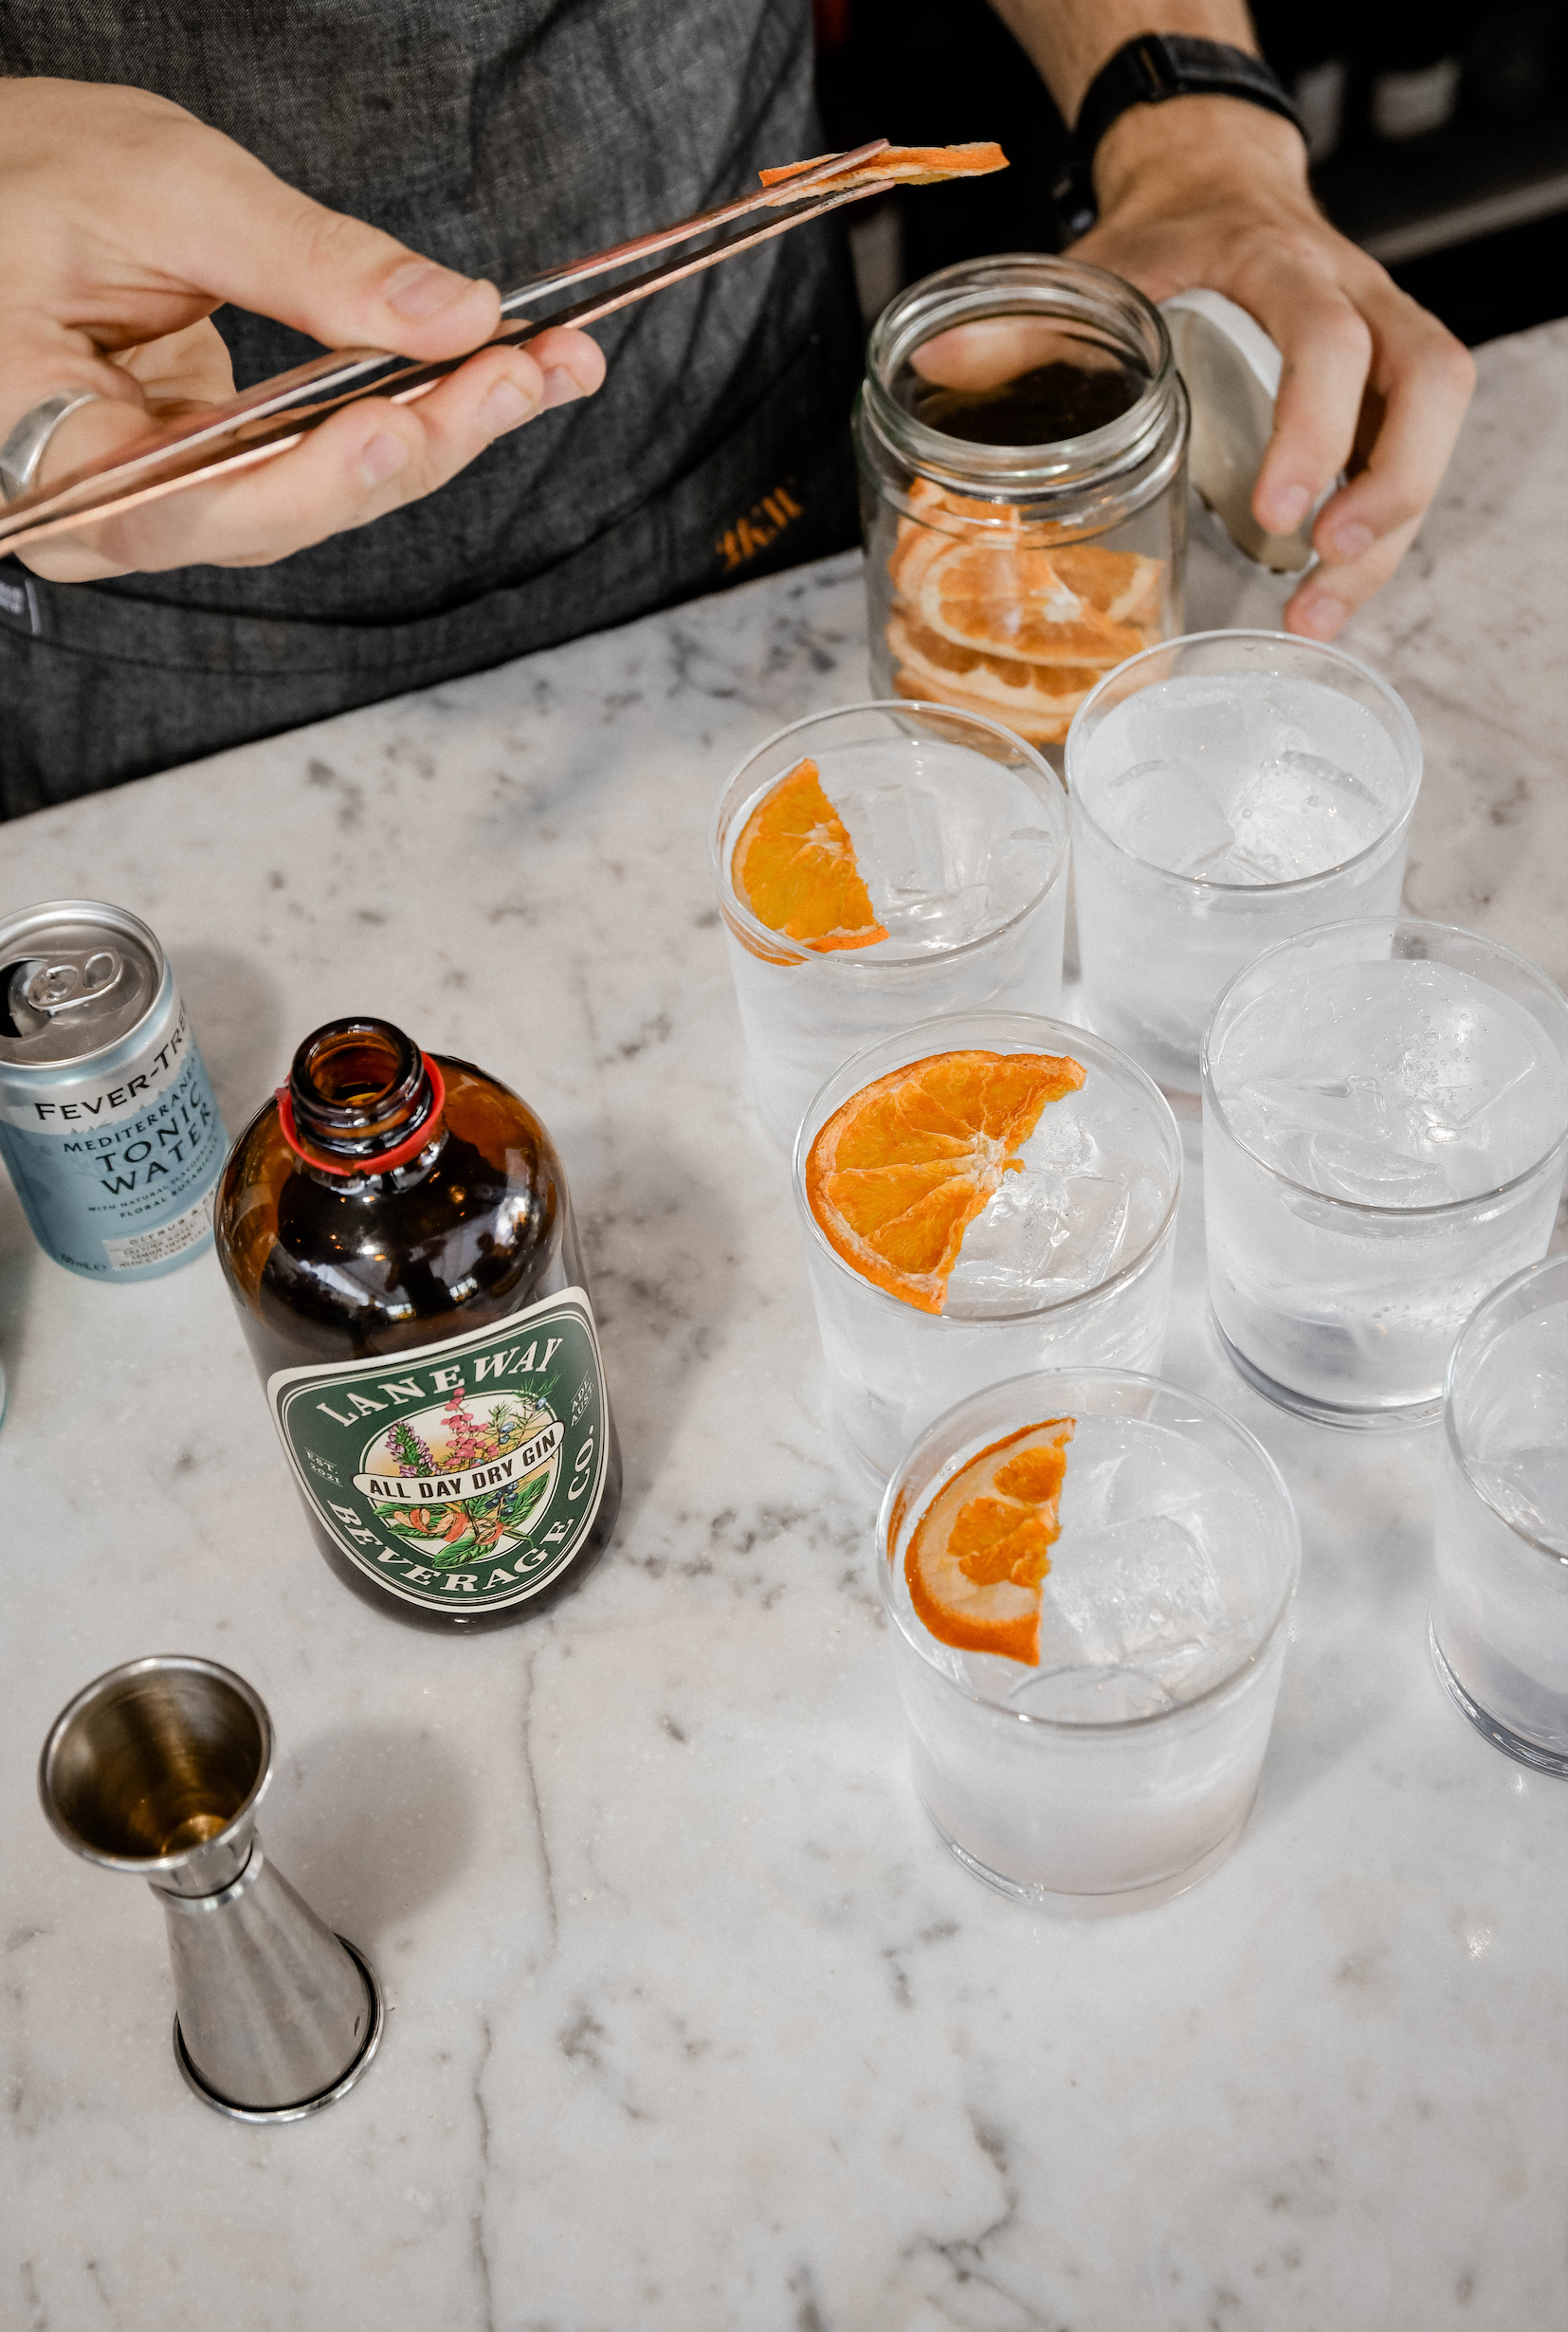 Laneway Beverage Co - All Day Dry Gin